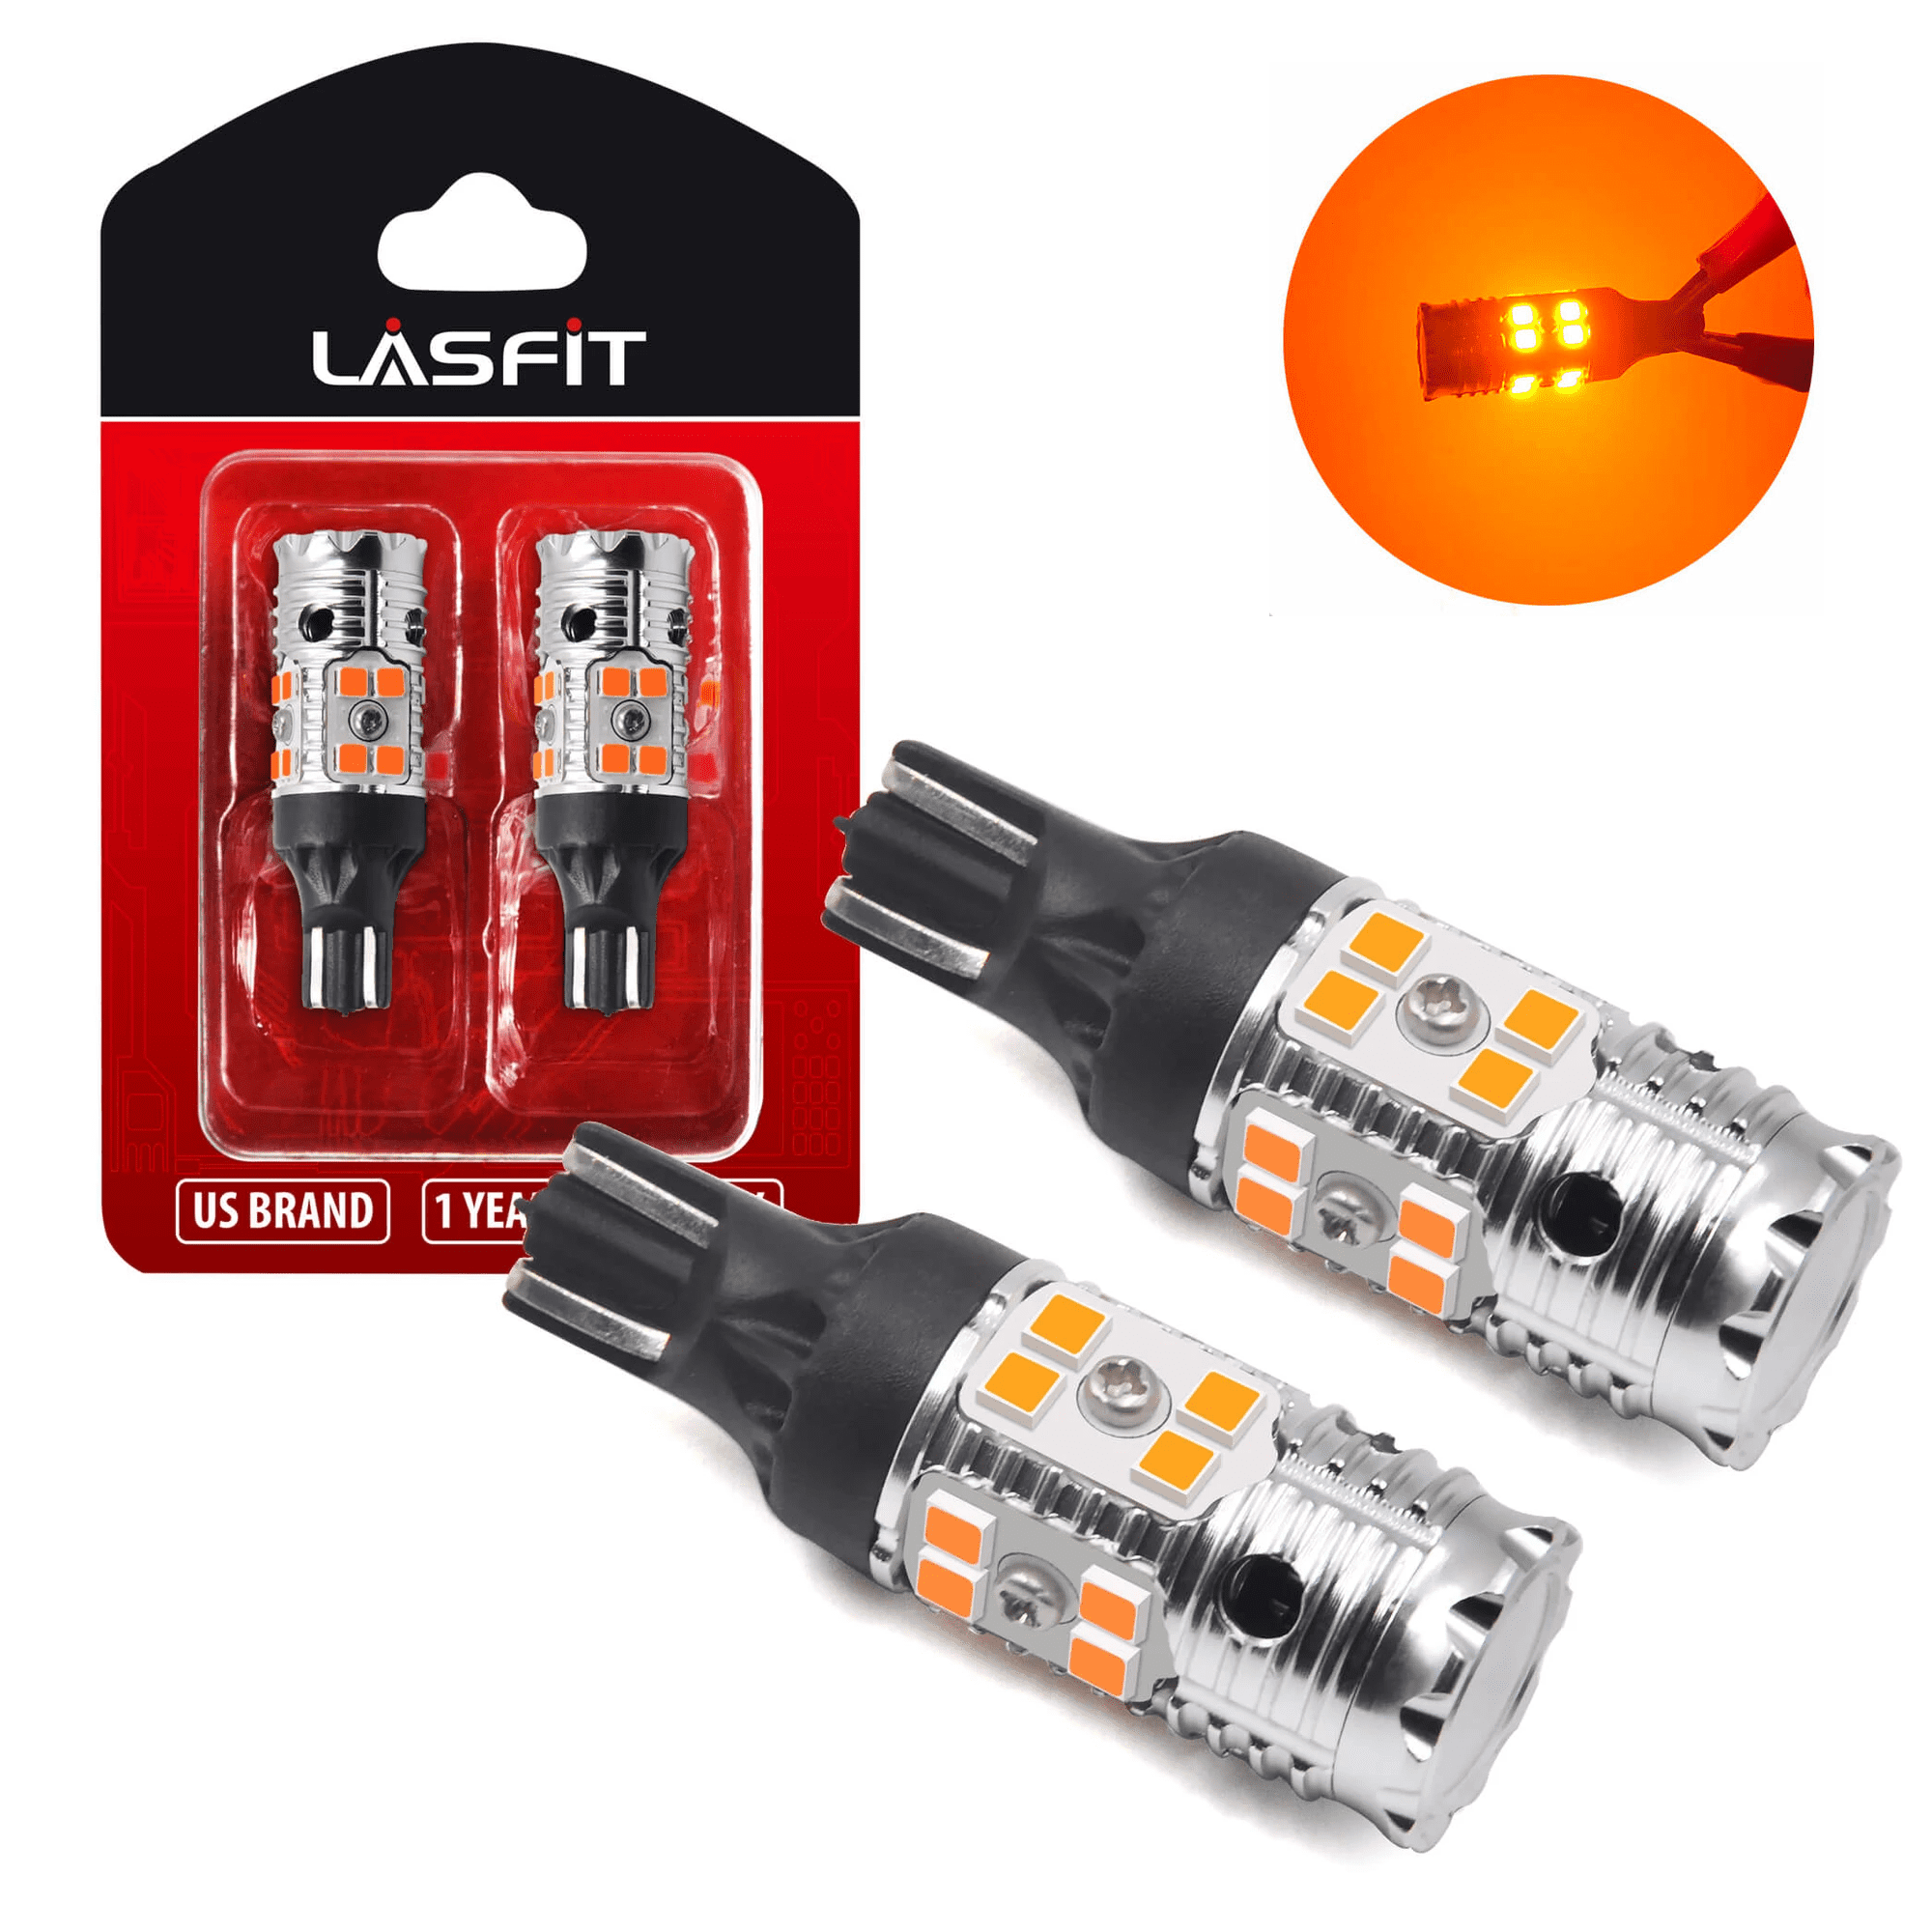 Lasfit 921 912 T15 Canbus Error Free Auto LED Bulbs For Turn Signal Light  Side Marker Lights, Amber, 2Pcs